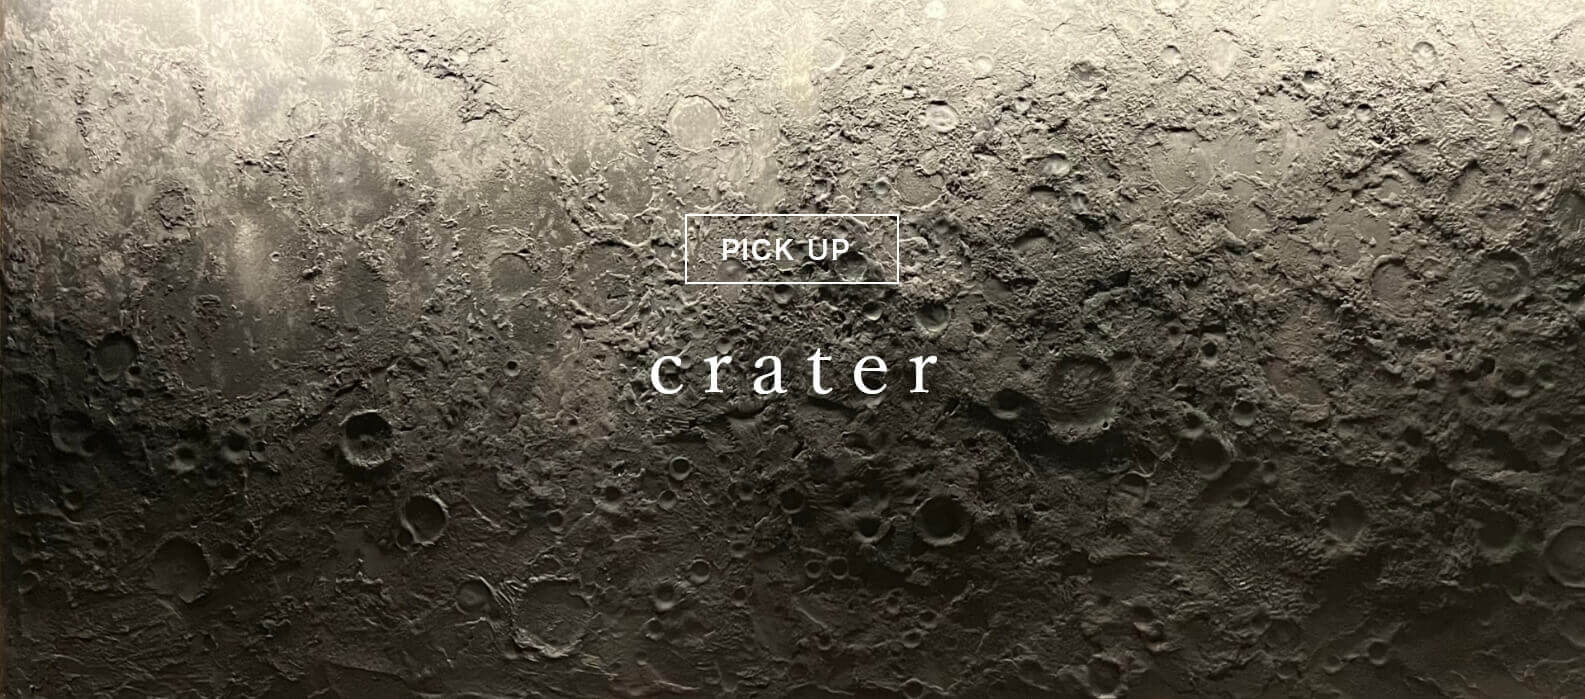 PICK UP crater